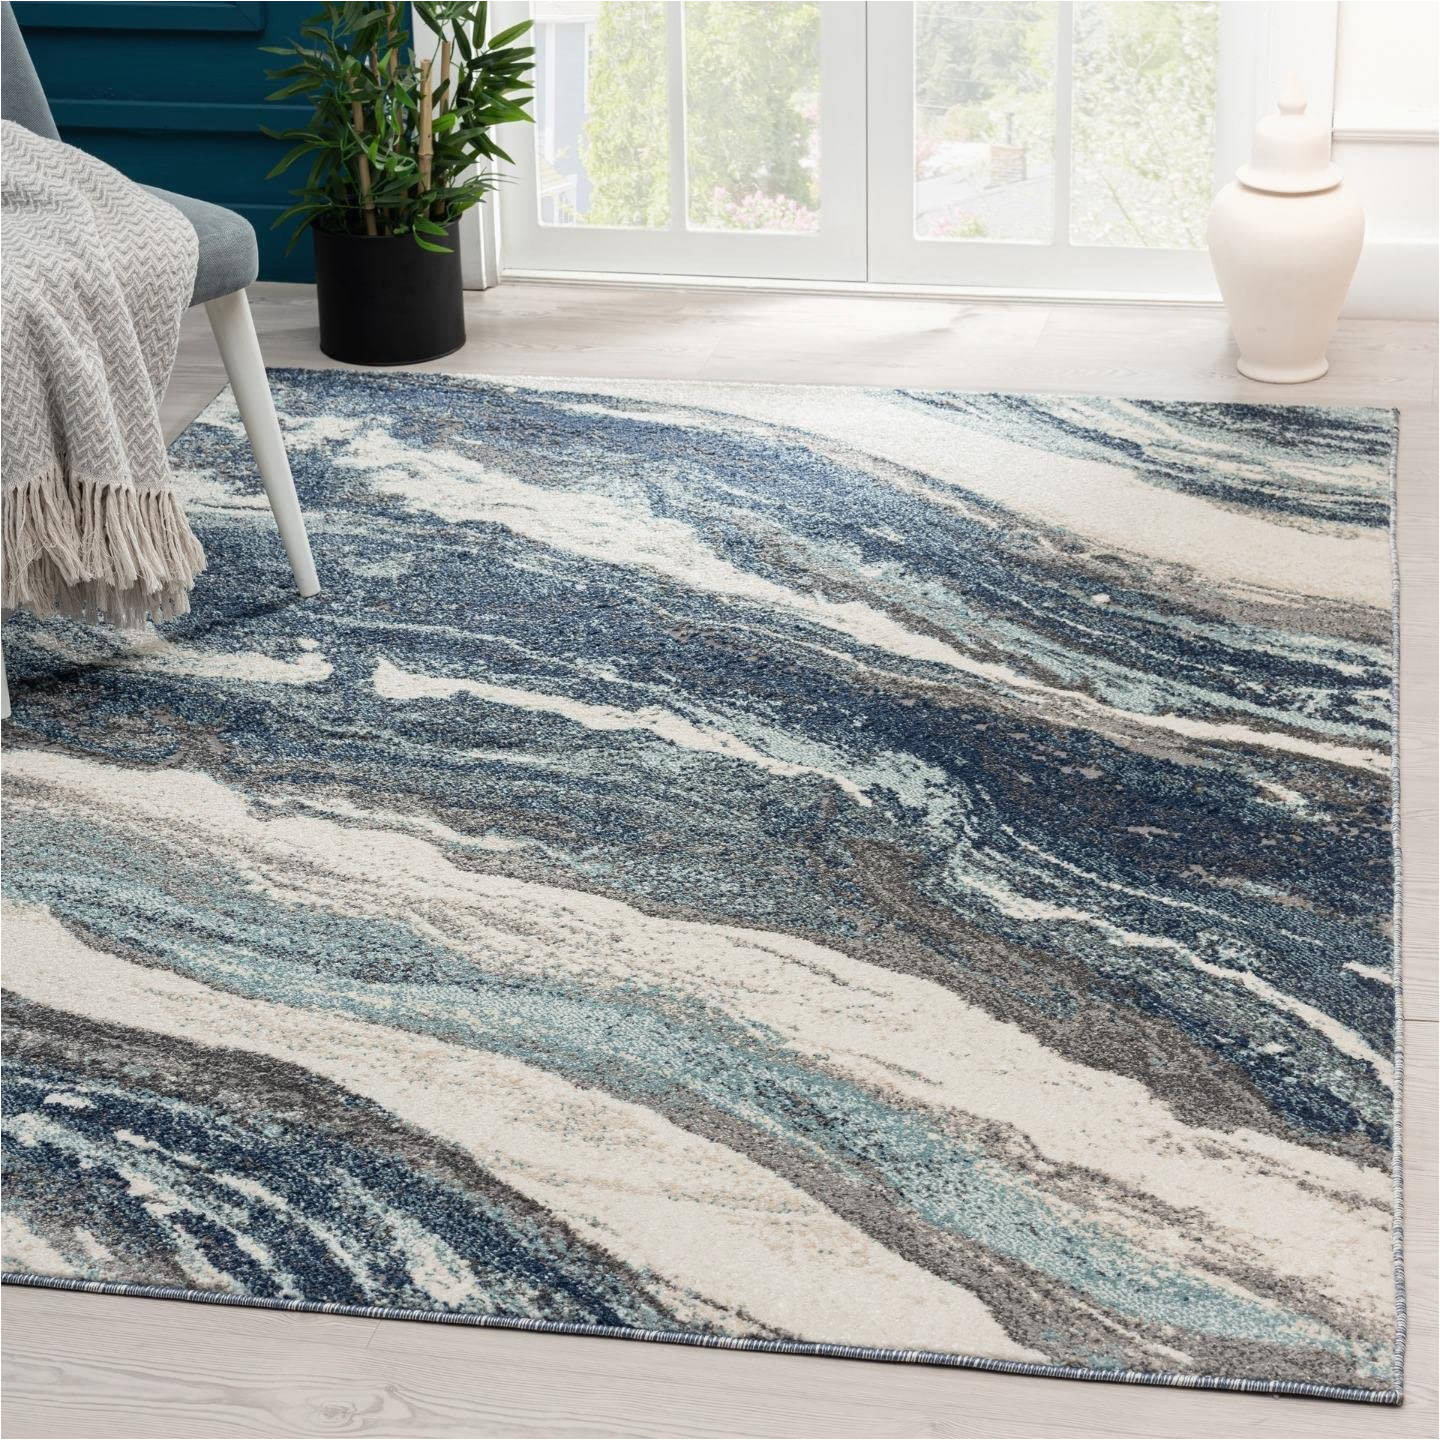 Lux Home Plush area Rug Luxe Weavers Rug â Art Deco Living Room Carpet with Marble Swirl â Persian area Rugs for Modern Home DÃ©cor, soft Luxury Rug, Stain-resistant, Medium …